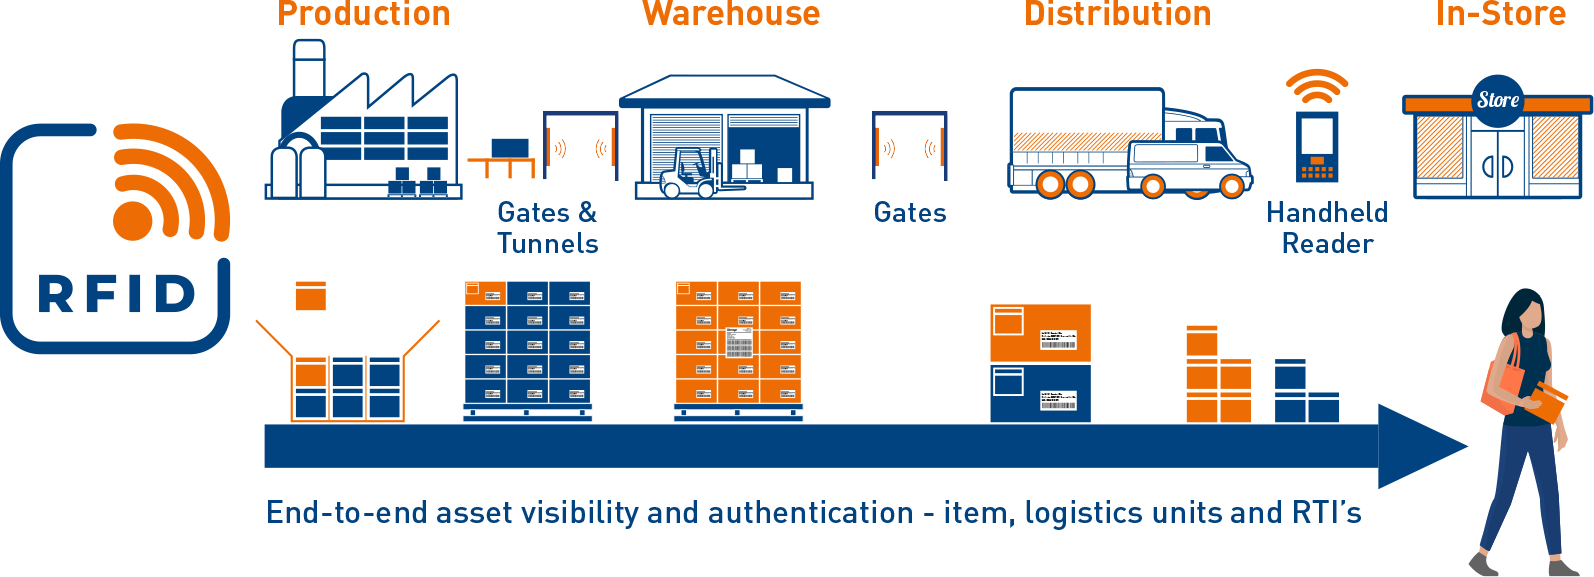 Visibility and traceability with RFID Technology